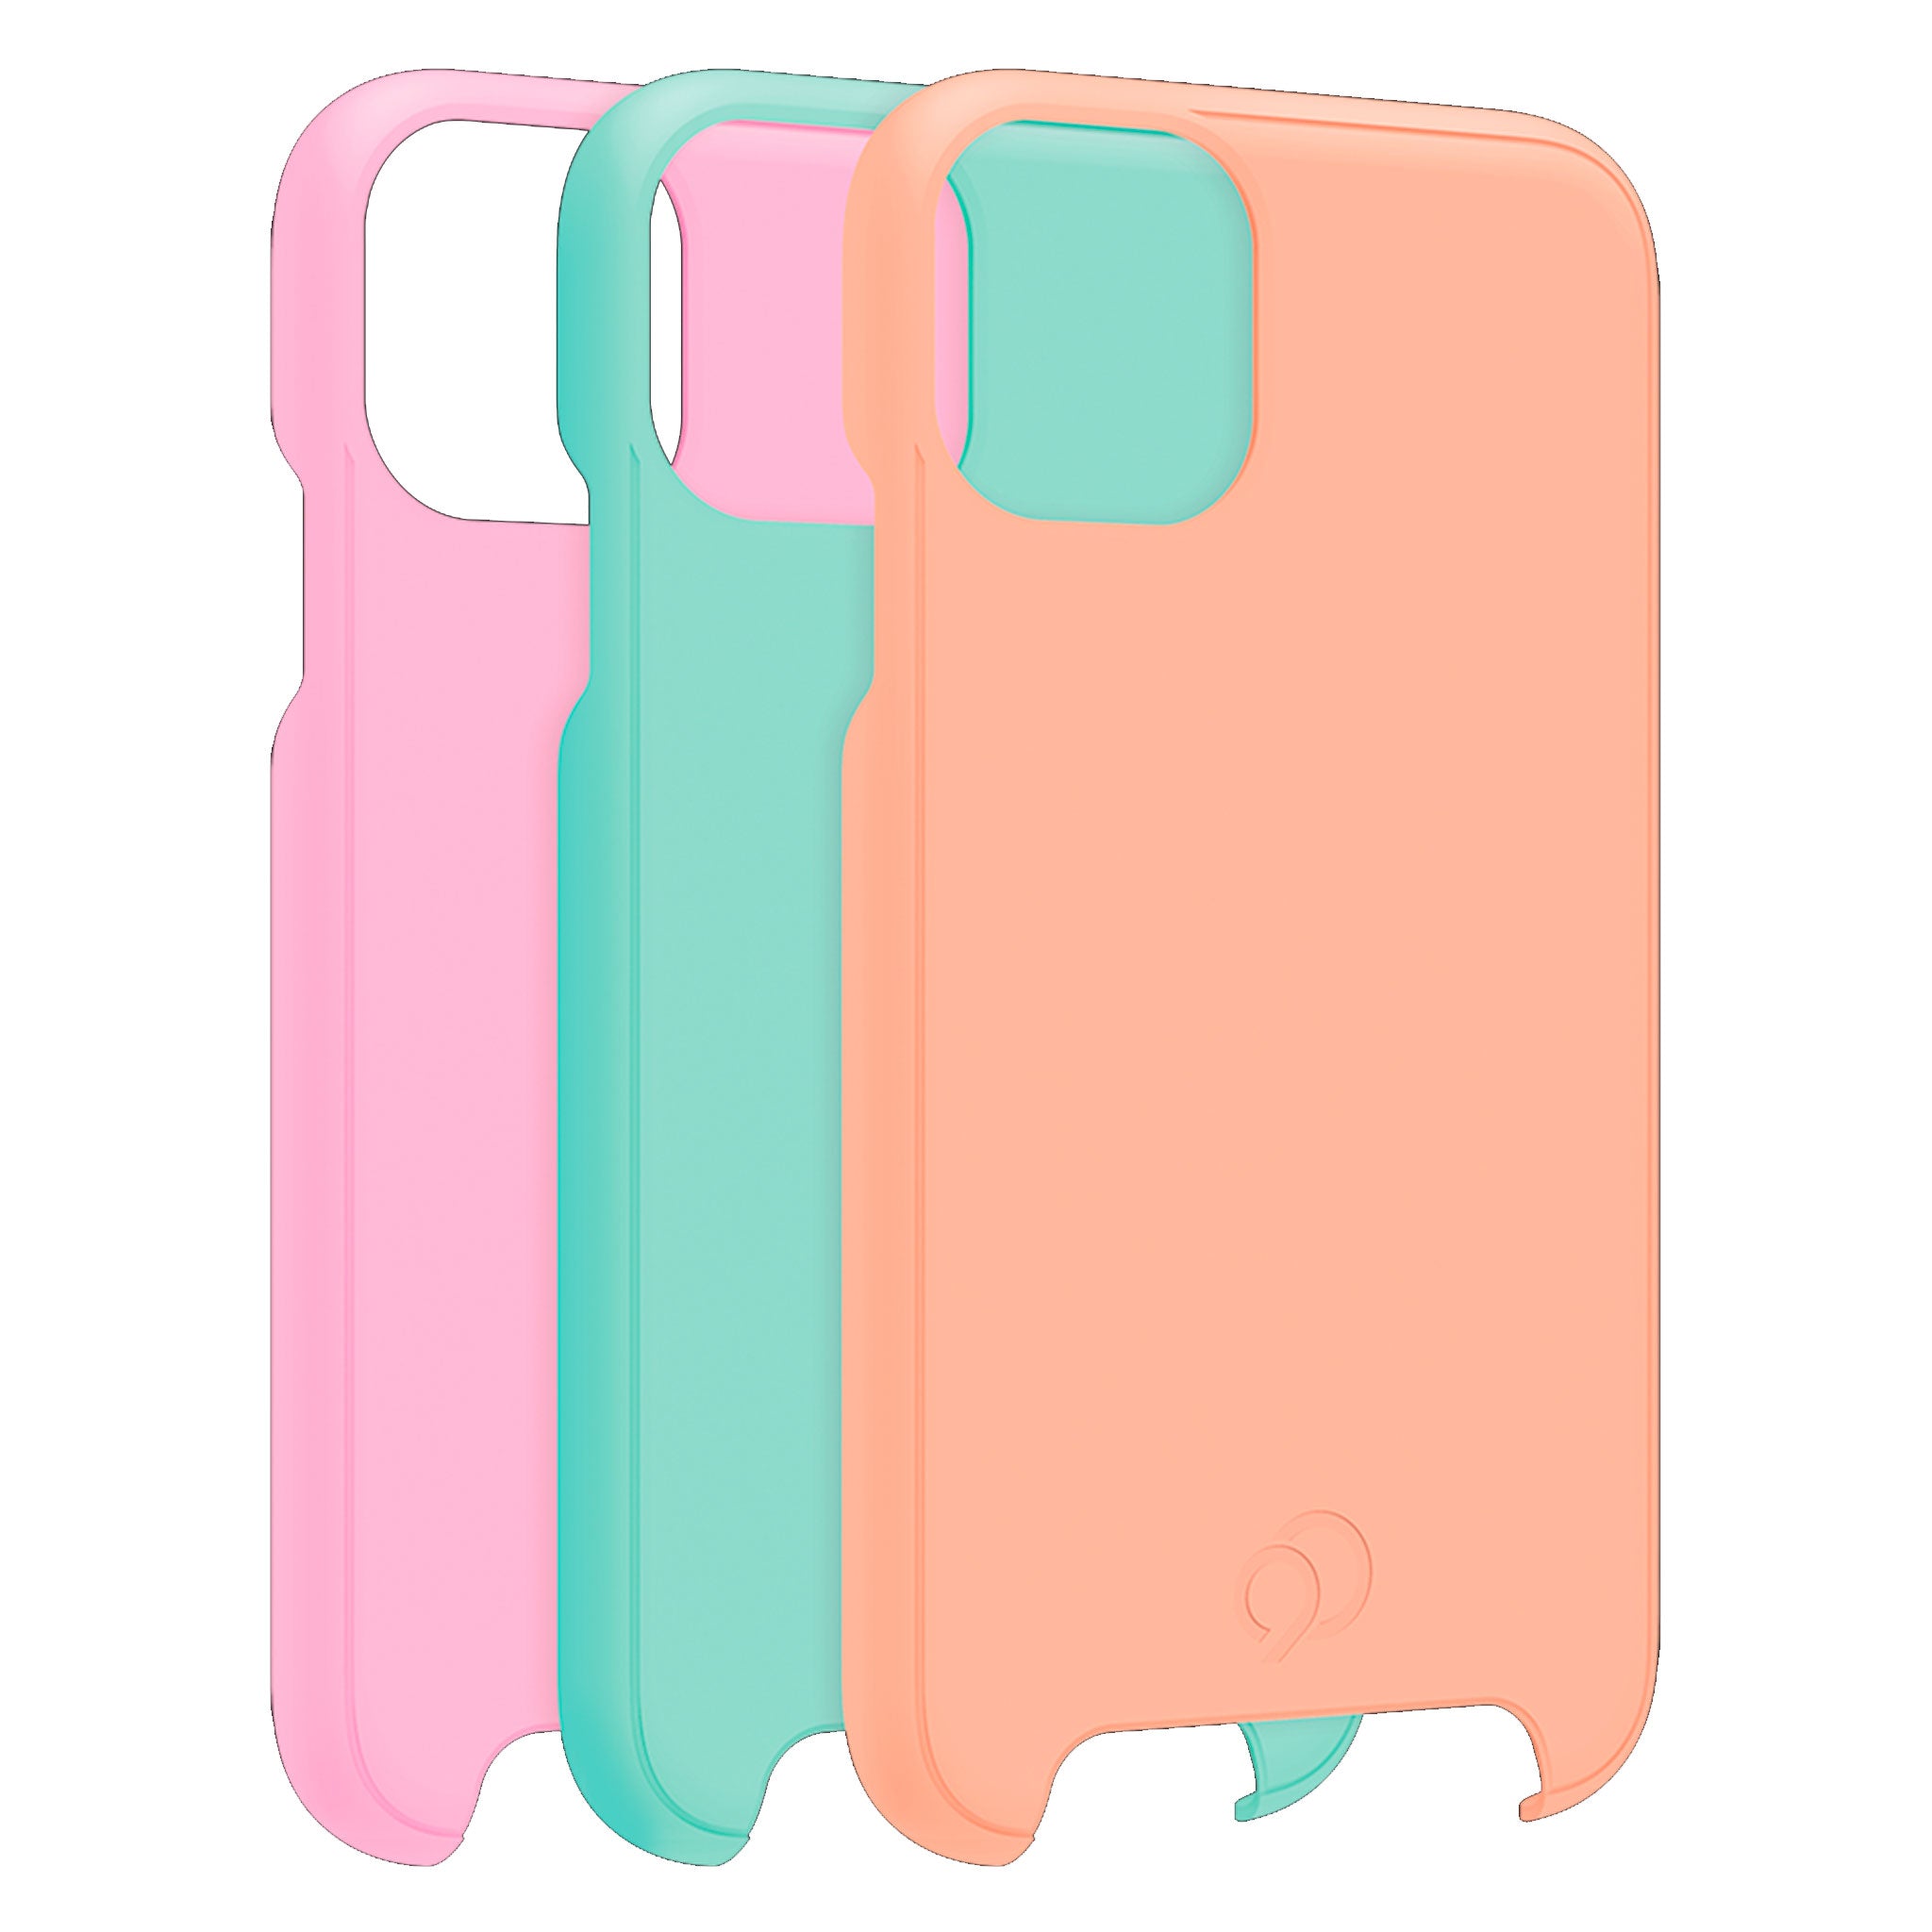 Nimbus9 - Lifestyle Kit Cases For Apple Iphone 11 Pro / Xs / X - Tropical Collection